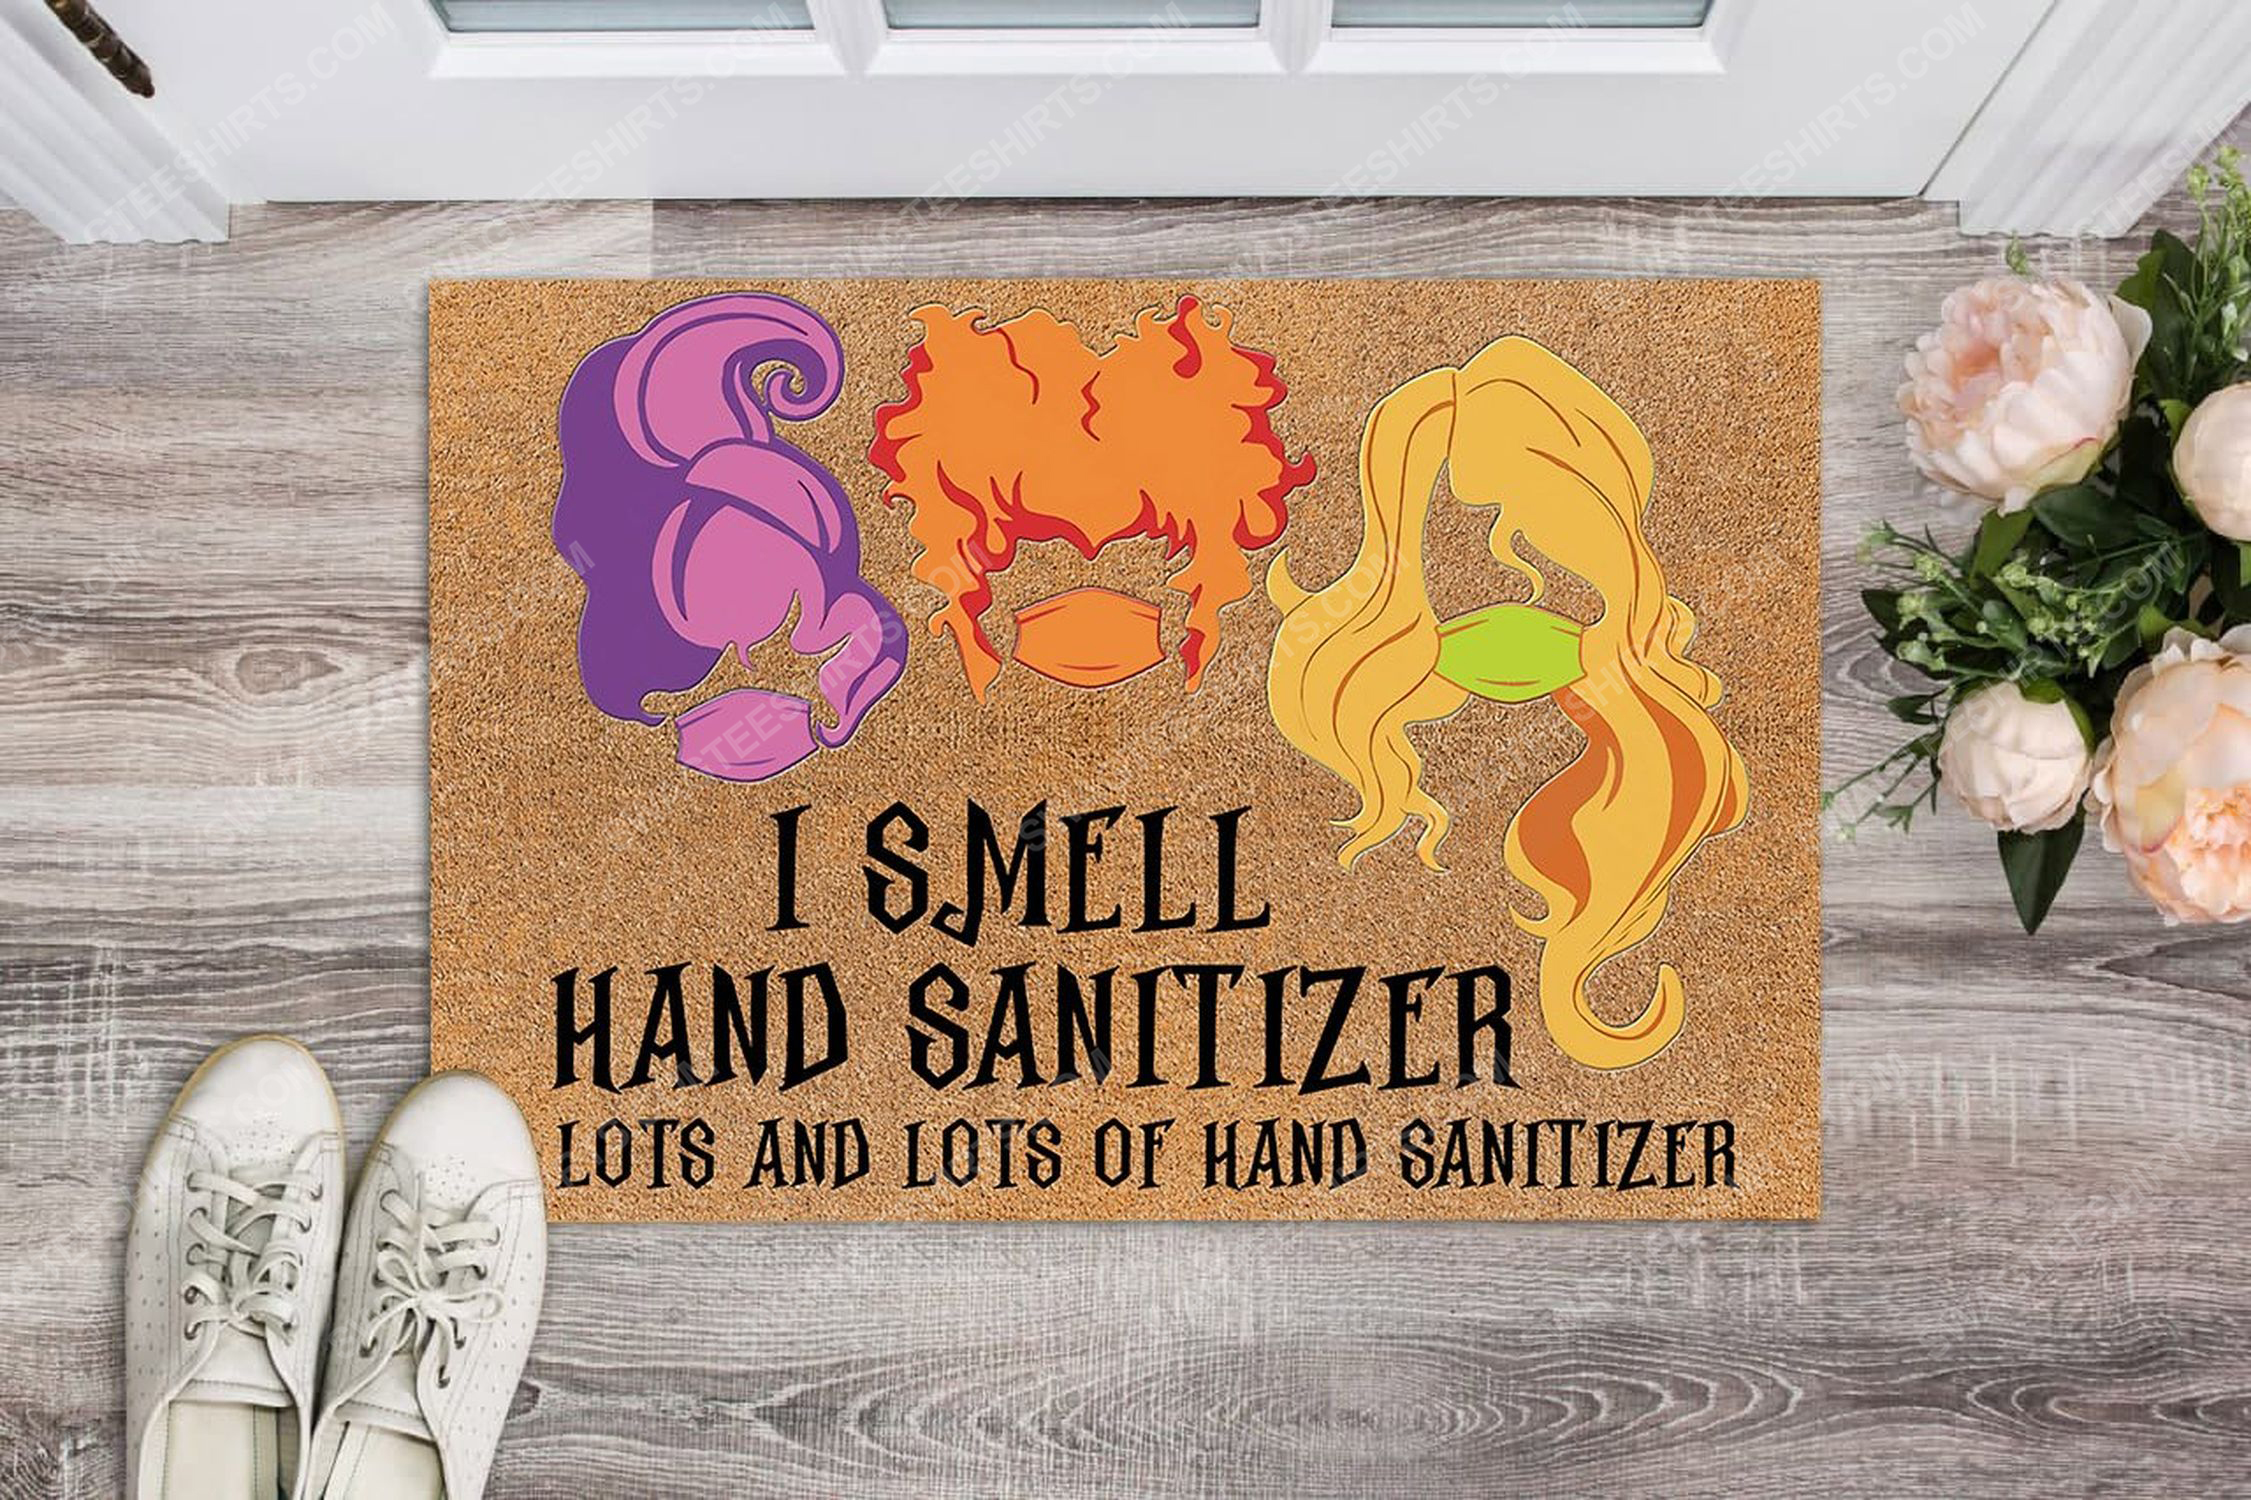 Hocus pocus i smell hand sanitizer lots and lots of hand sanitizer teacher doormat